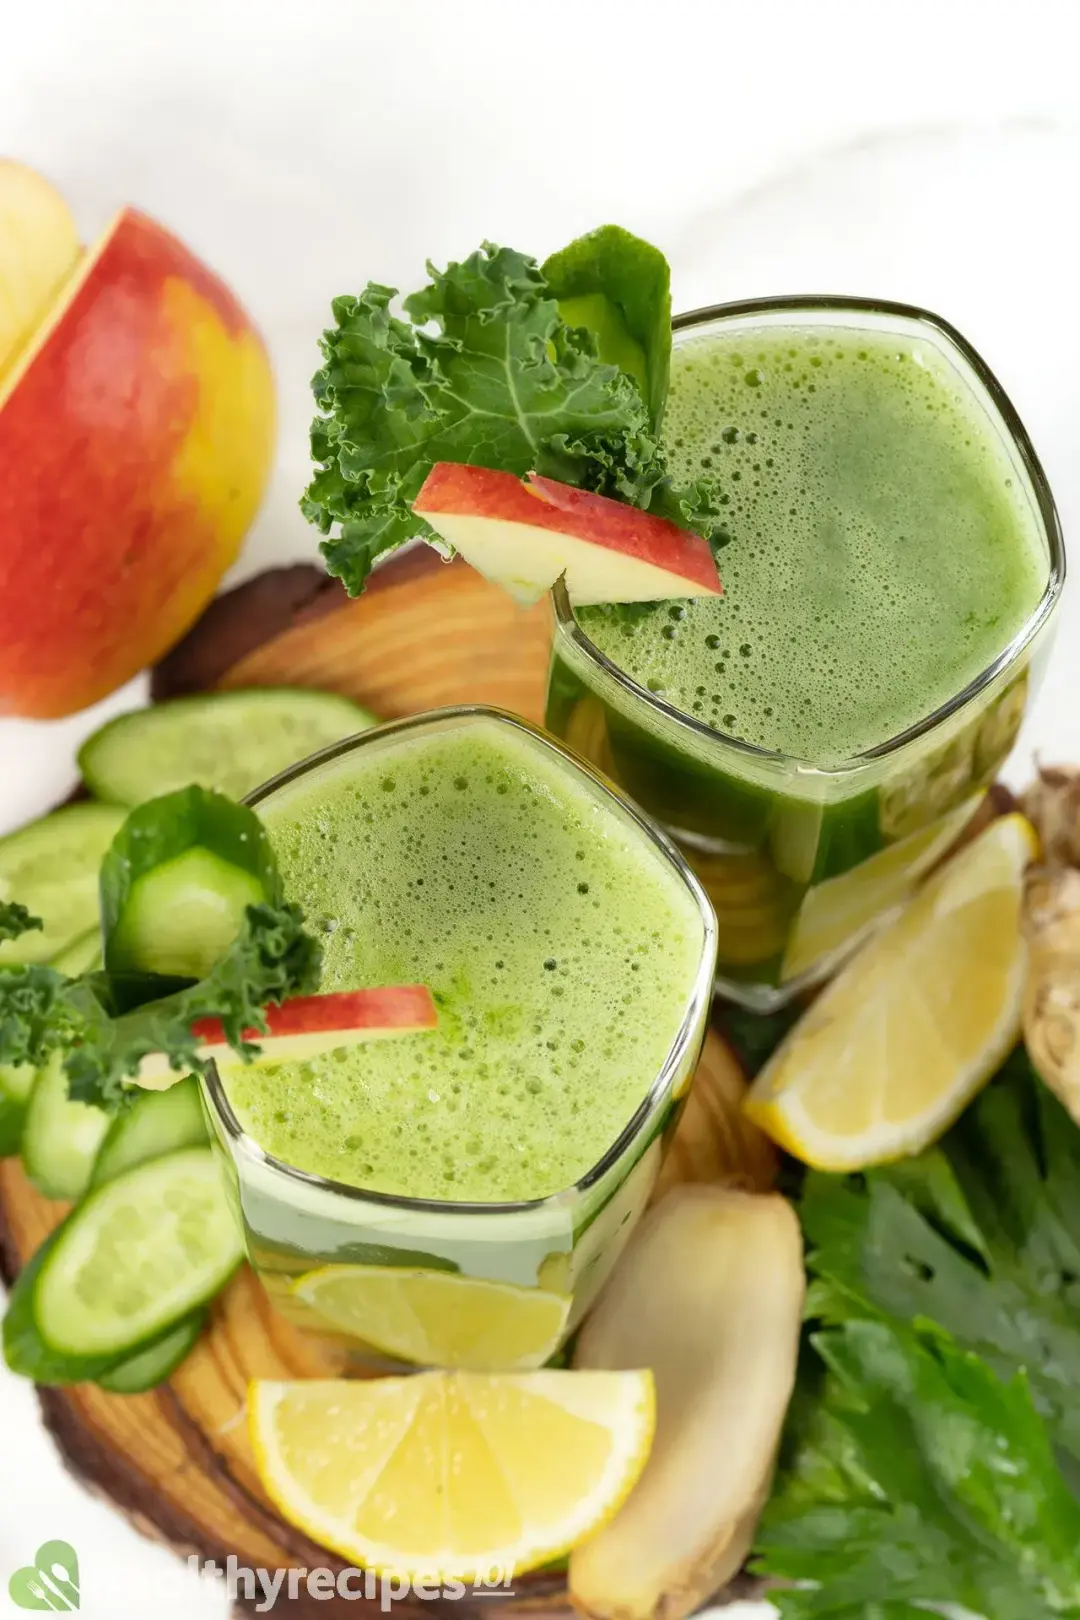 Two glasses of green juice garnished with lemon wedges, cucumber slices, and kale, taken from above